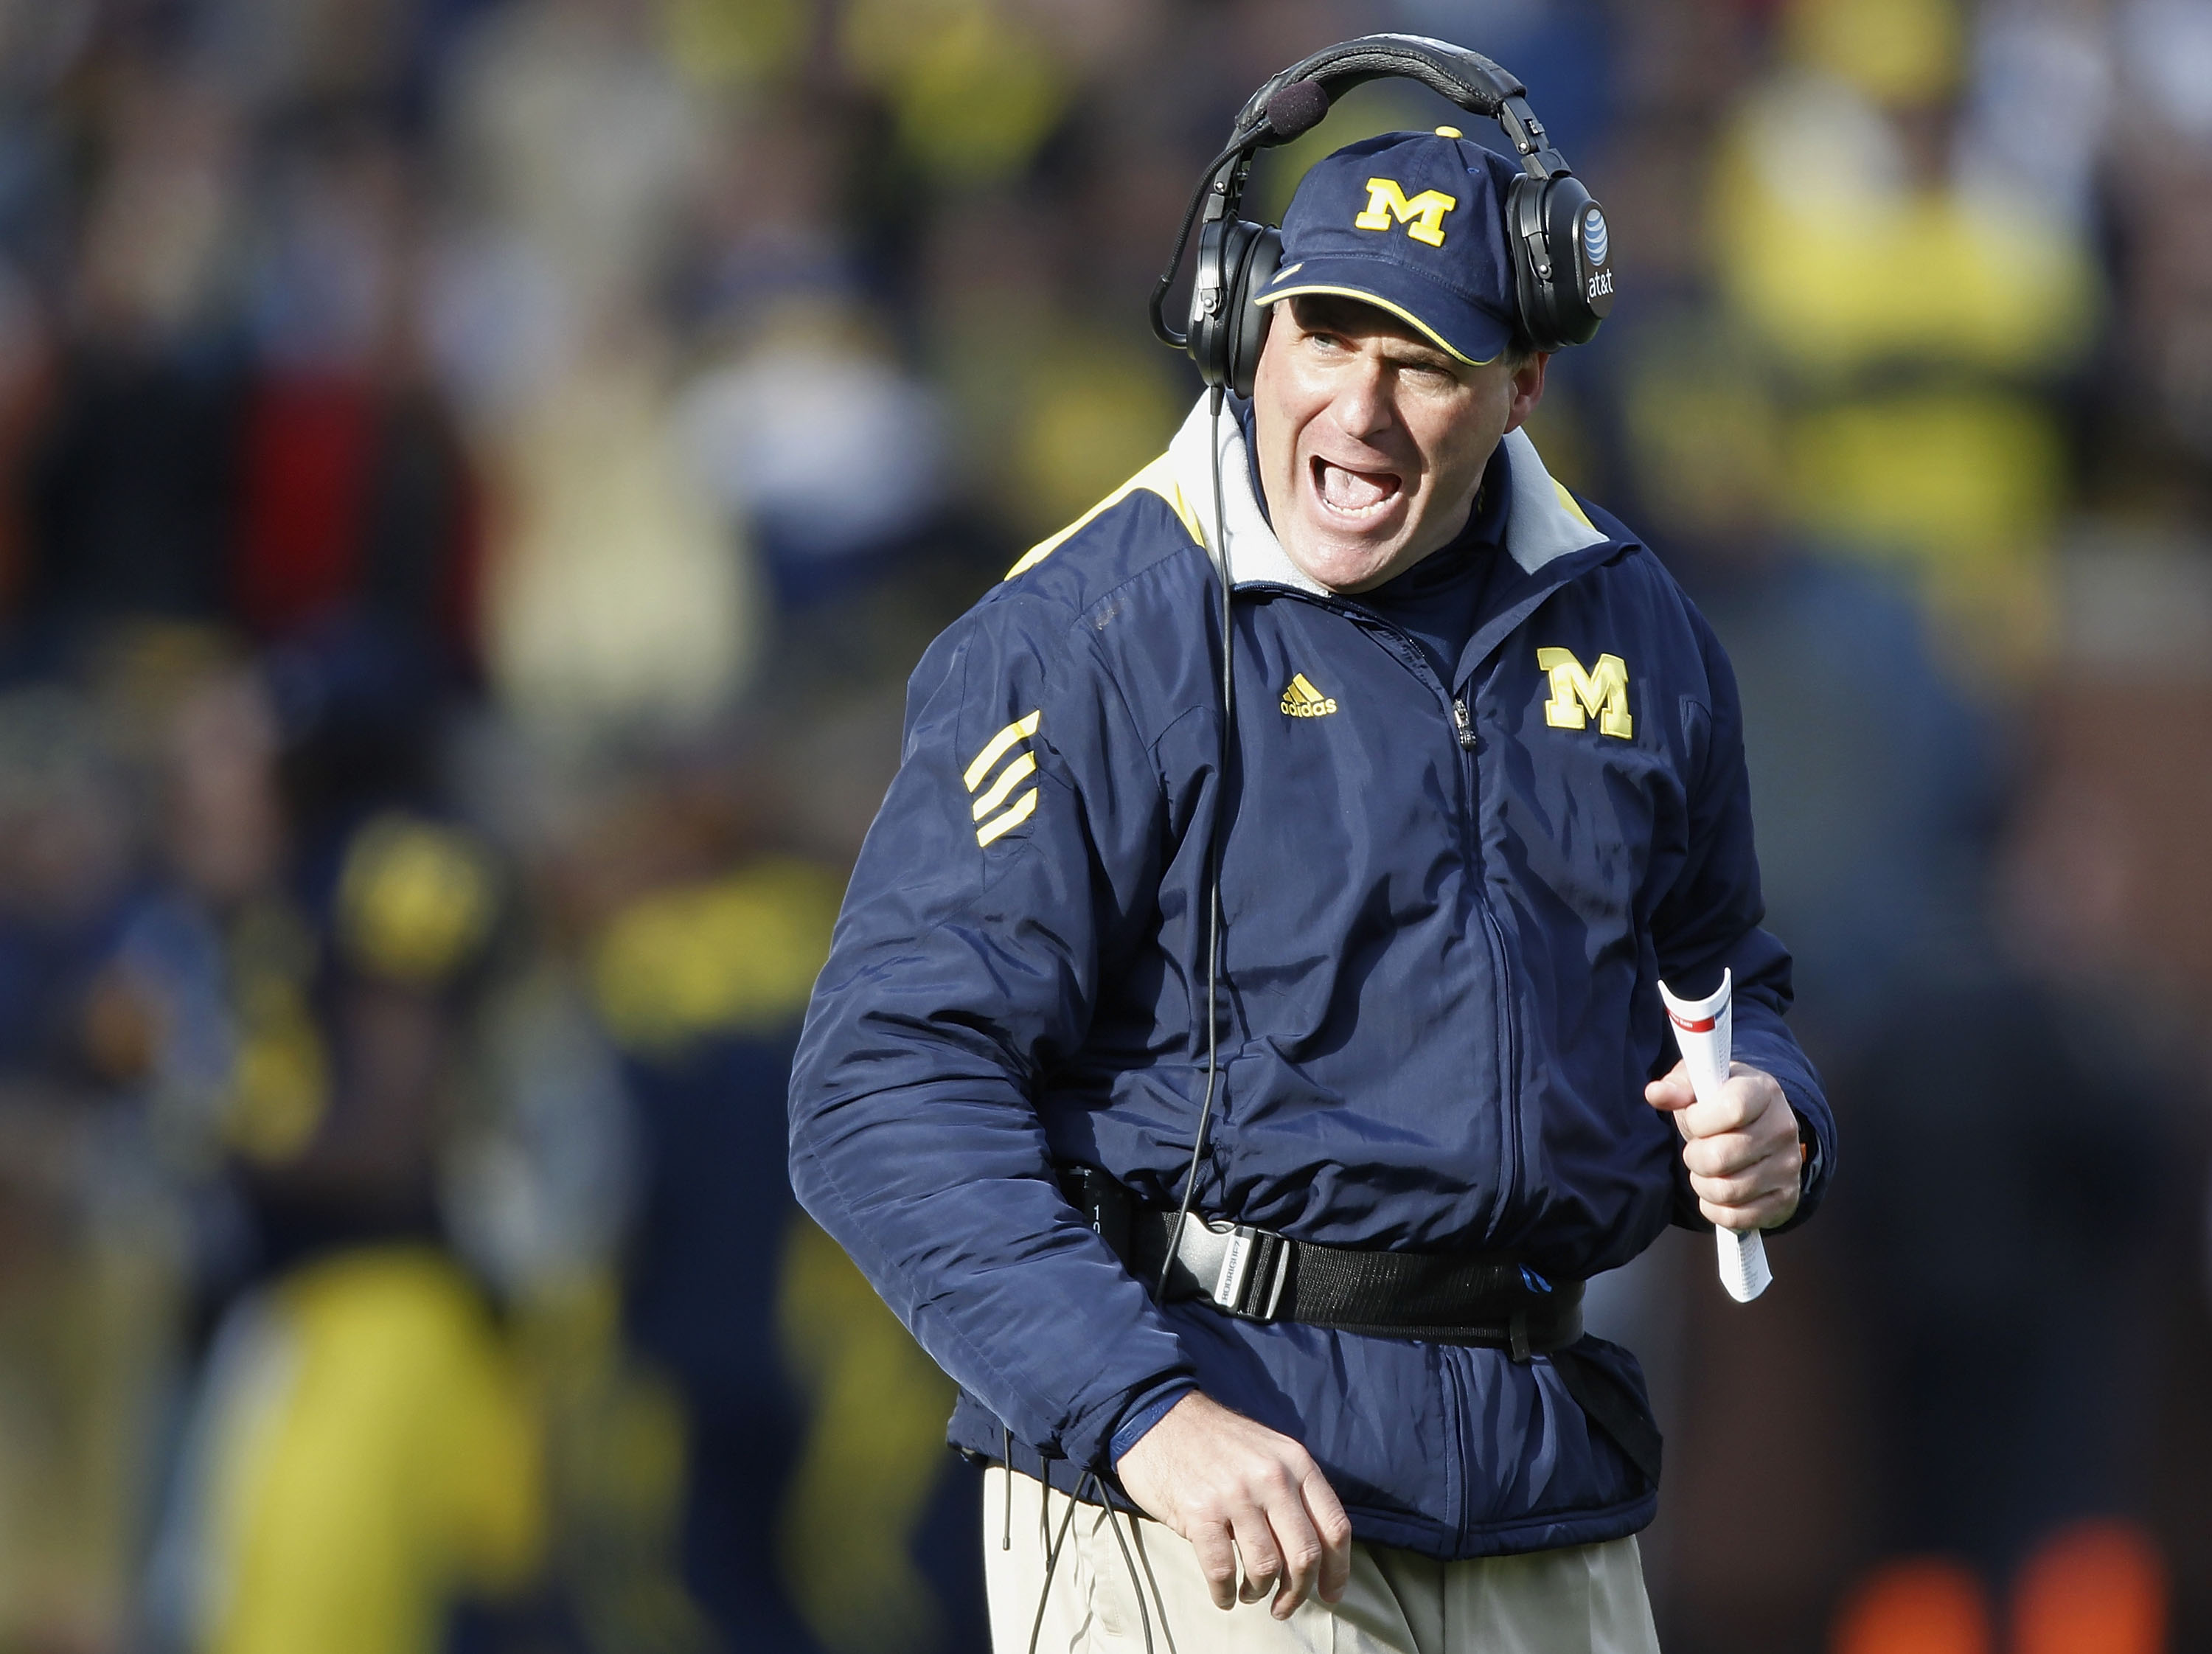 ANN ARBOR, MI - NOVEMBER 20:  Head coach Rich Rodriguez of the Michigan Wolverines reacts while playing the Wisconson Badgers at Michigan Stadium on November 20, 2010 in Ann Arbor, Michigan. Wisconsin won the game 48-28. (Photo by Gregory Shamus/Getty Ima